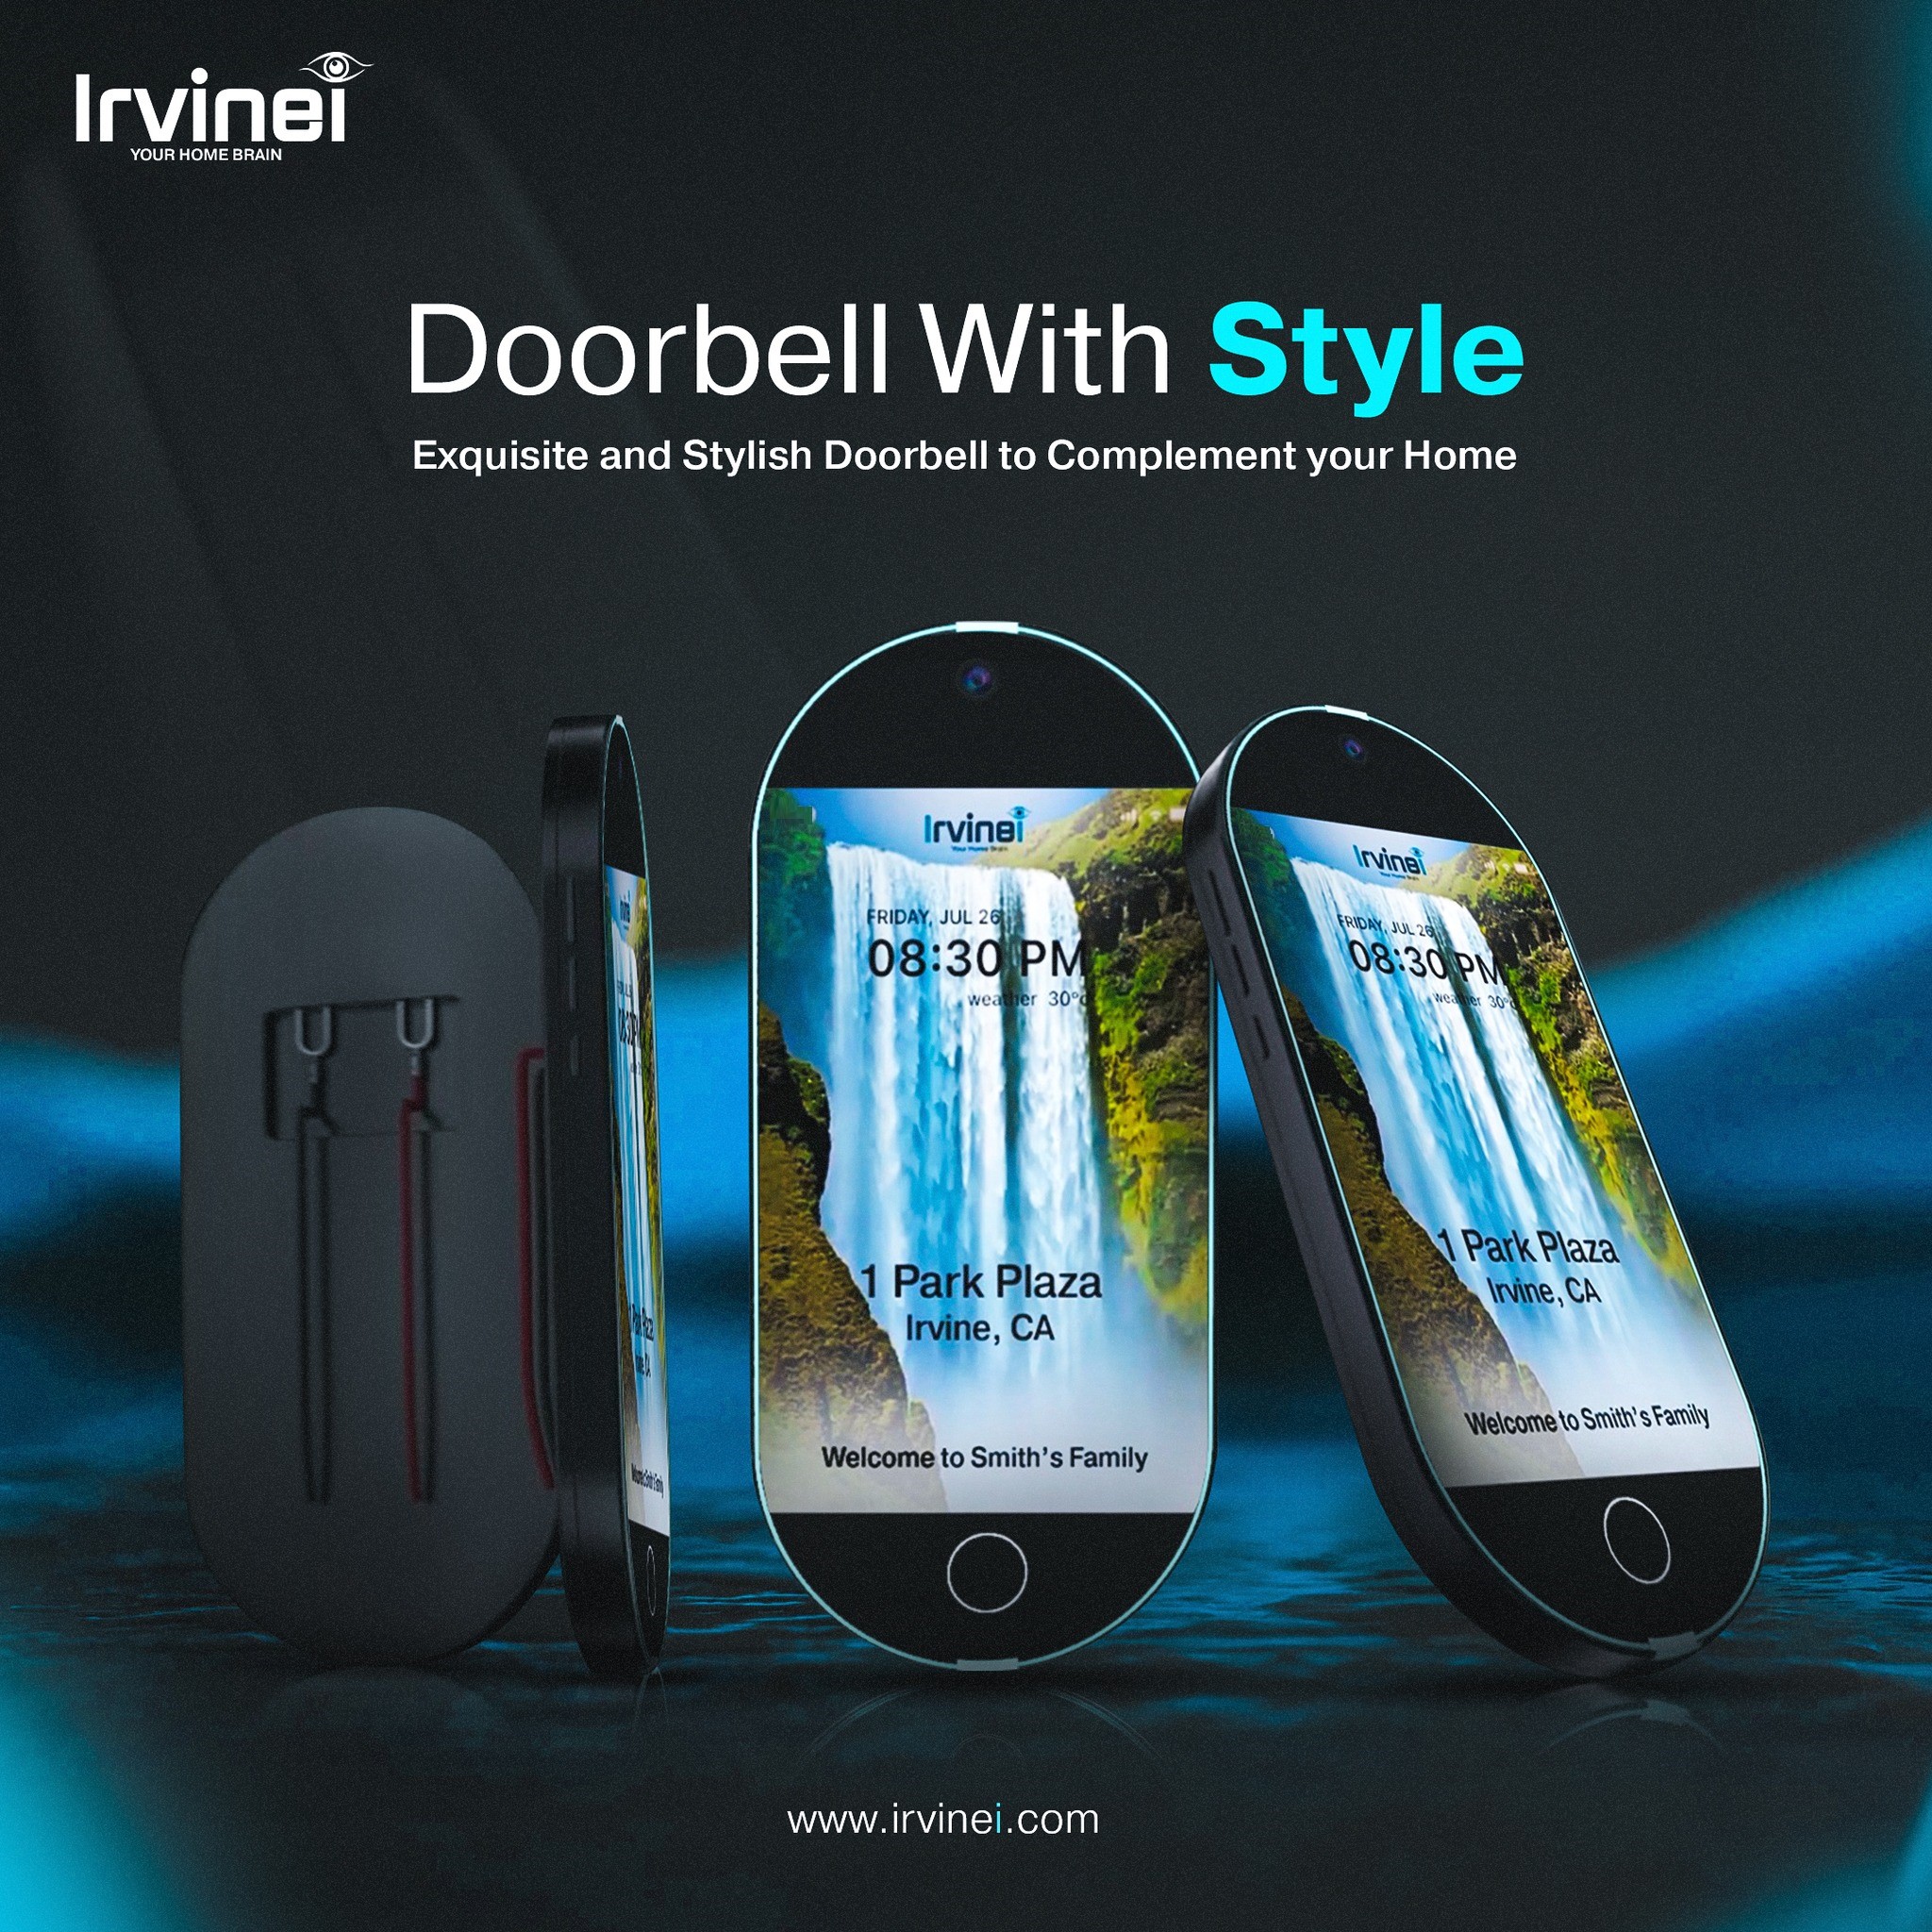 Doorbell with style